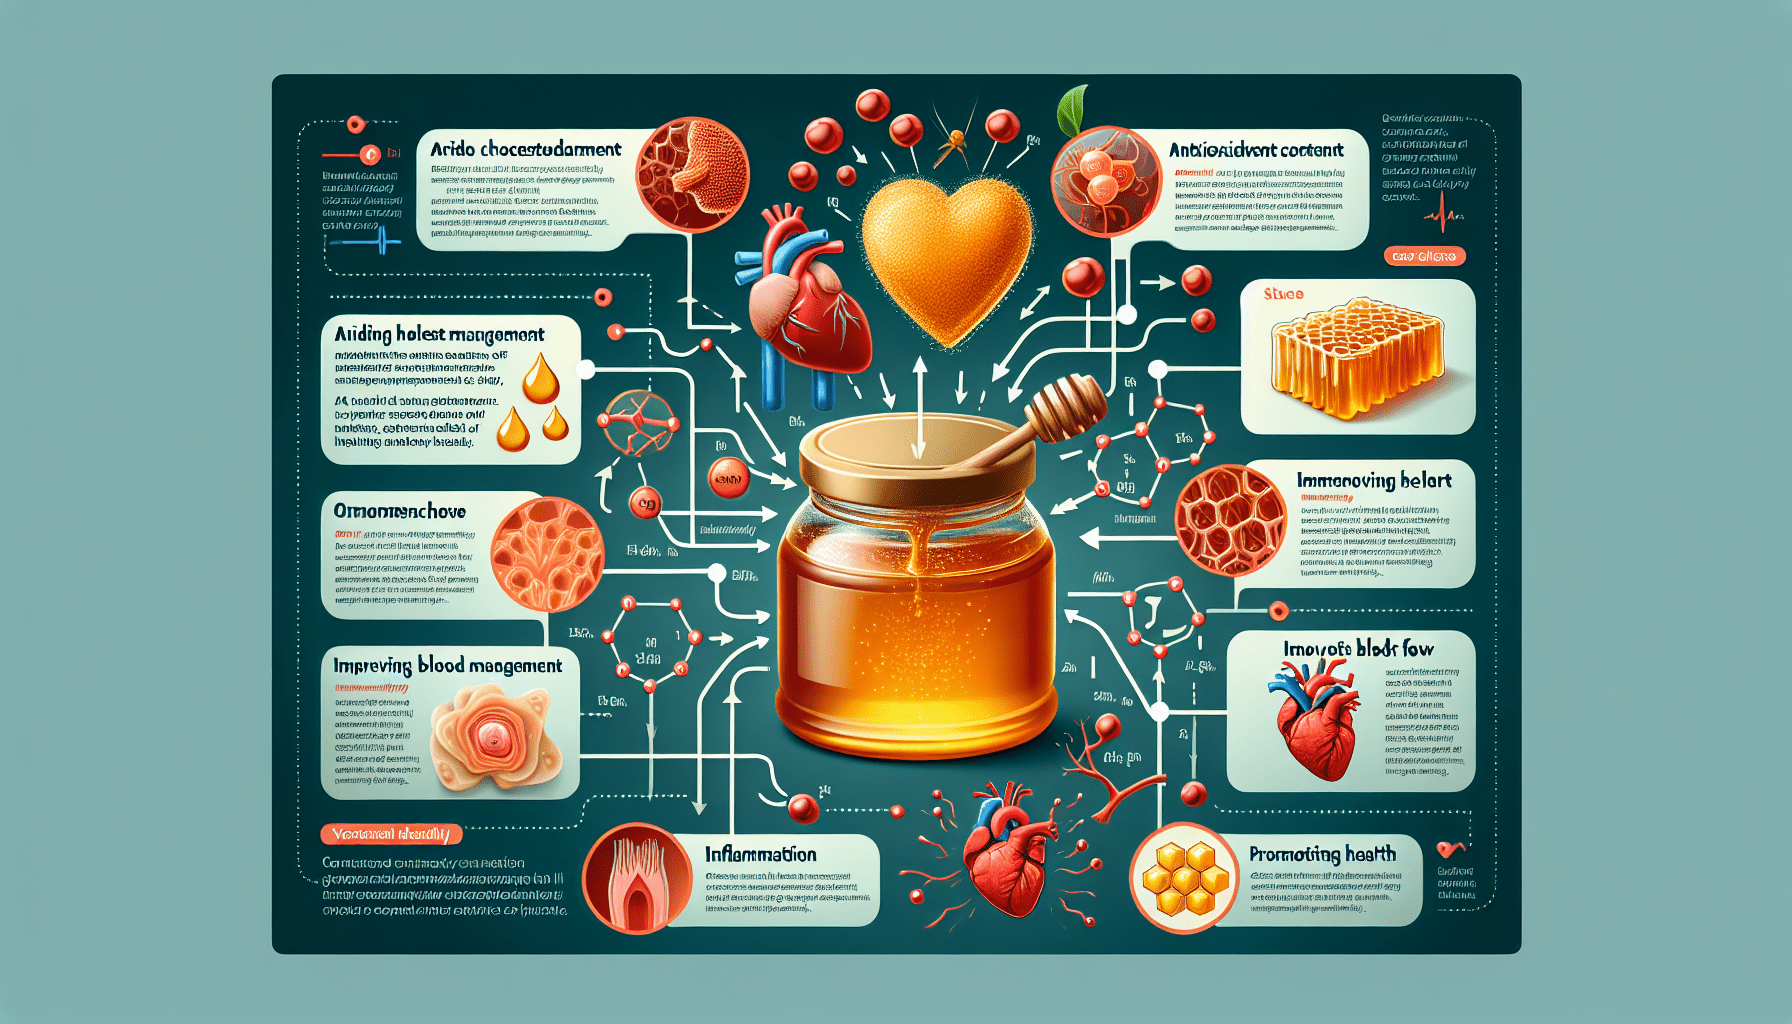 20 how does honey support cardiovascular health and cholesterol management 1